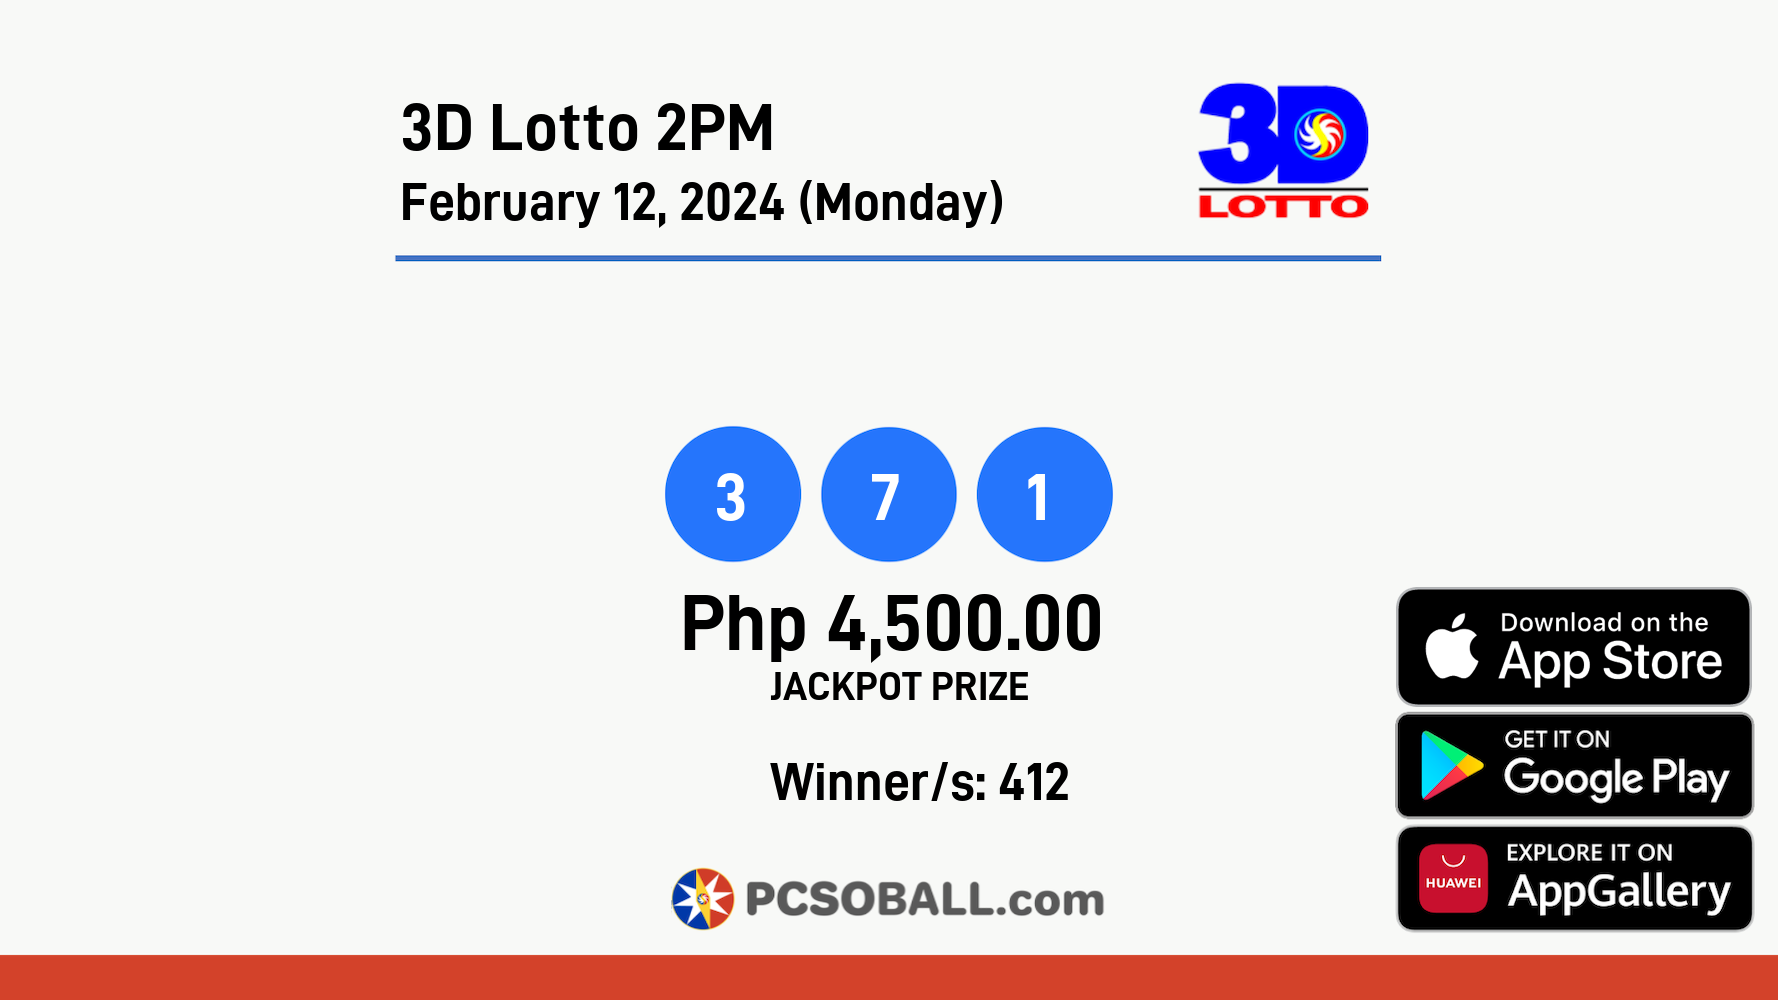 3D Lotto 2PM February 12, 2024 (Monday) Result